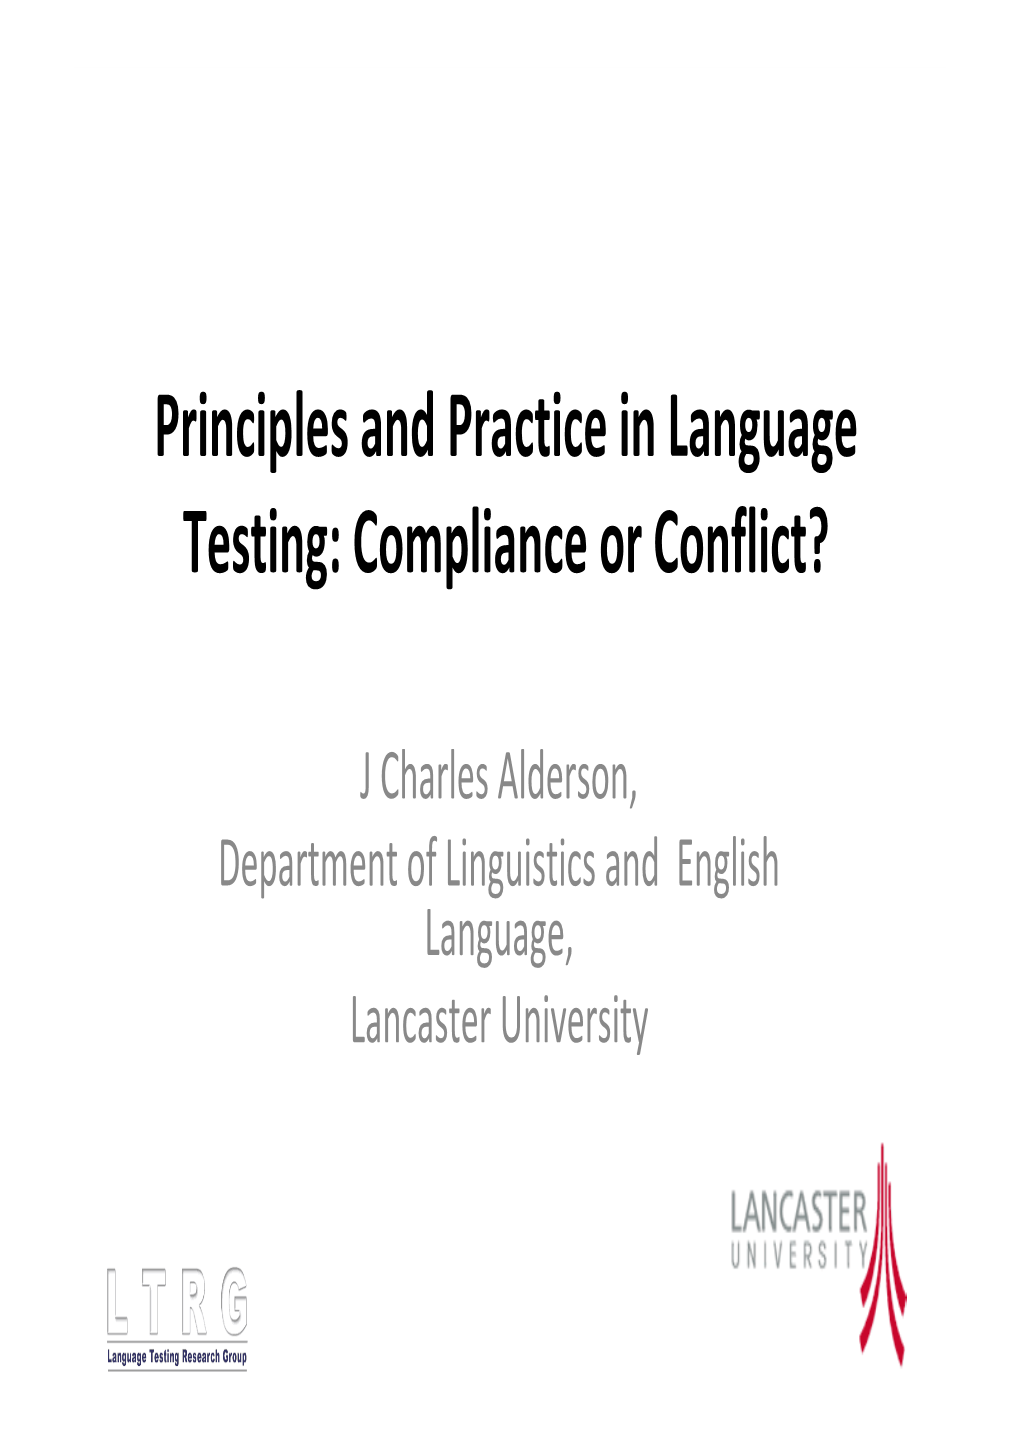 Principles and Practice in Language Testing: Compliance Or Conflict?